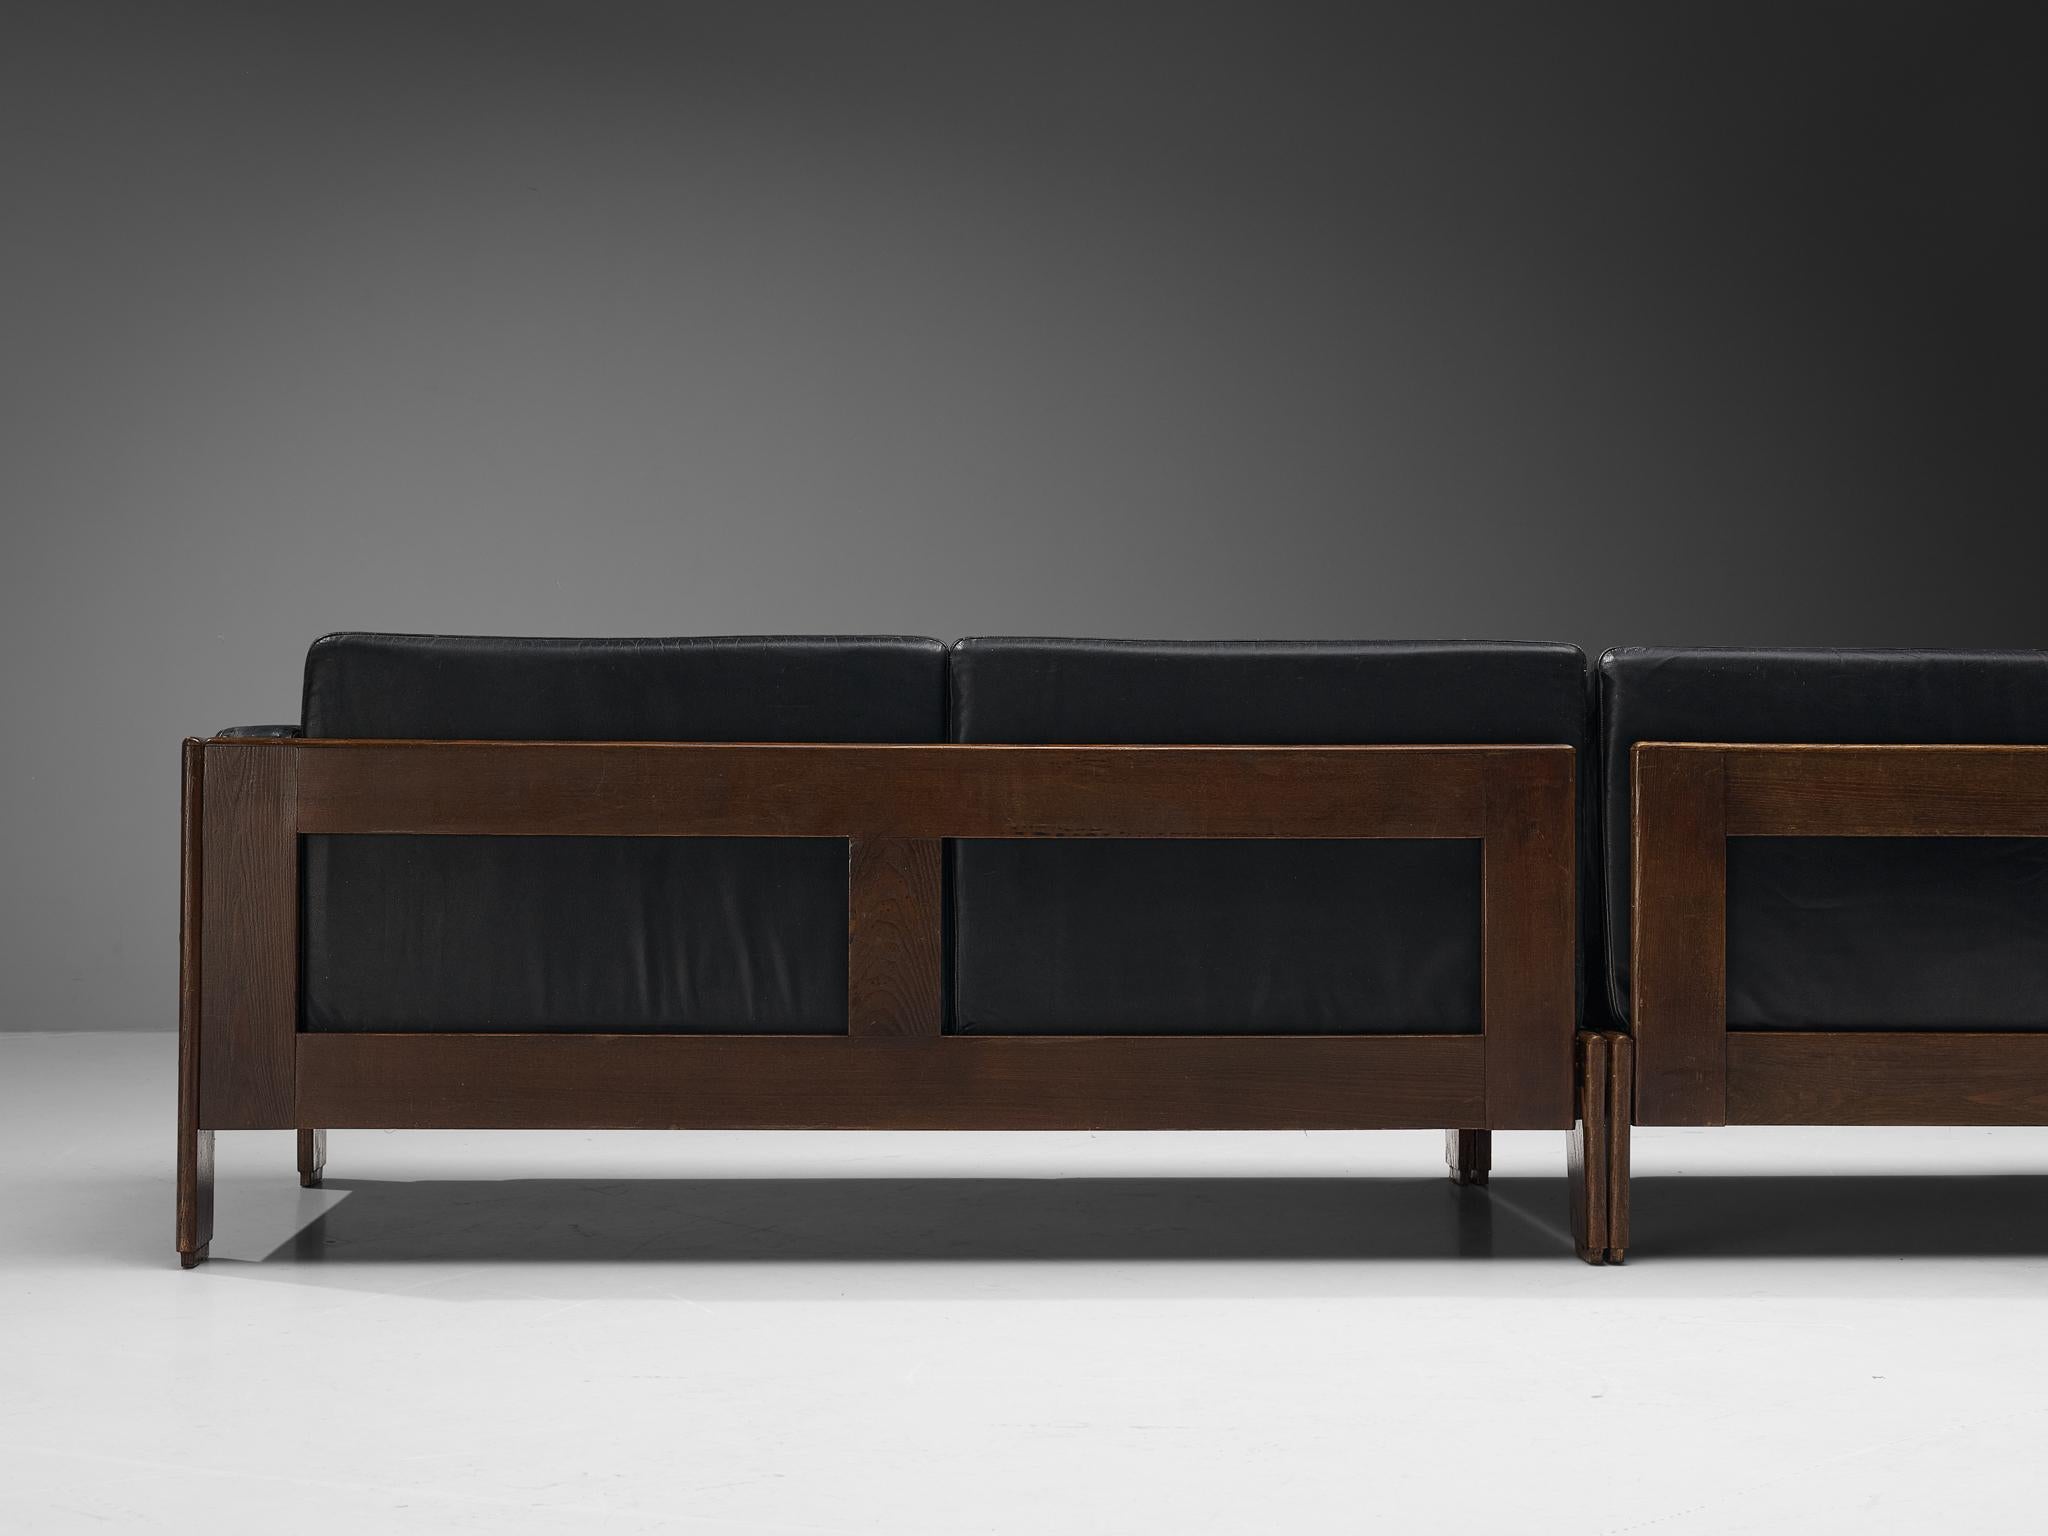 Italian Mid-Century Modern Sofa in Ash and Black Leather  For Sale 1